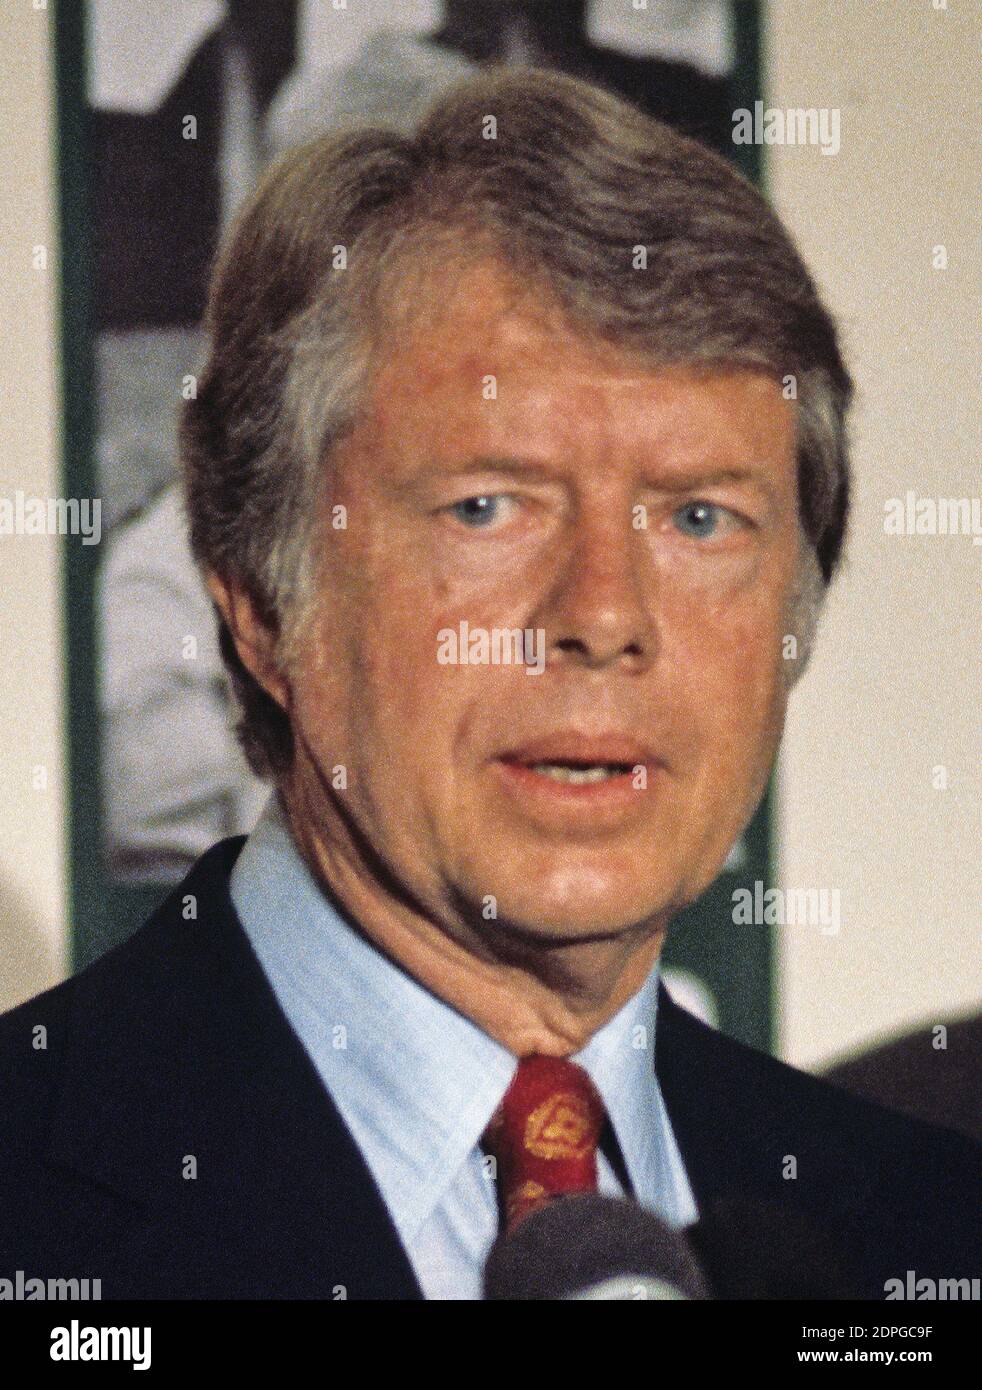 Governor Jimmy Carter (Democrat of Georgia) a candidate for the 1976 Democratic nomination for President of the United States, makes a campaign appearance in Baltimore, Maryland on May 13, 1976. Photo by Arnie Sachs/CNP/ABACAPRESS.COM Stock Photo